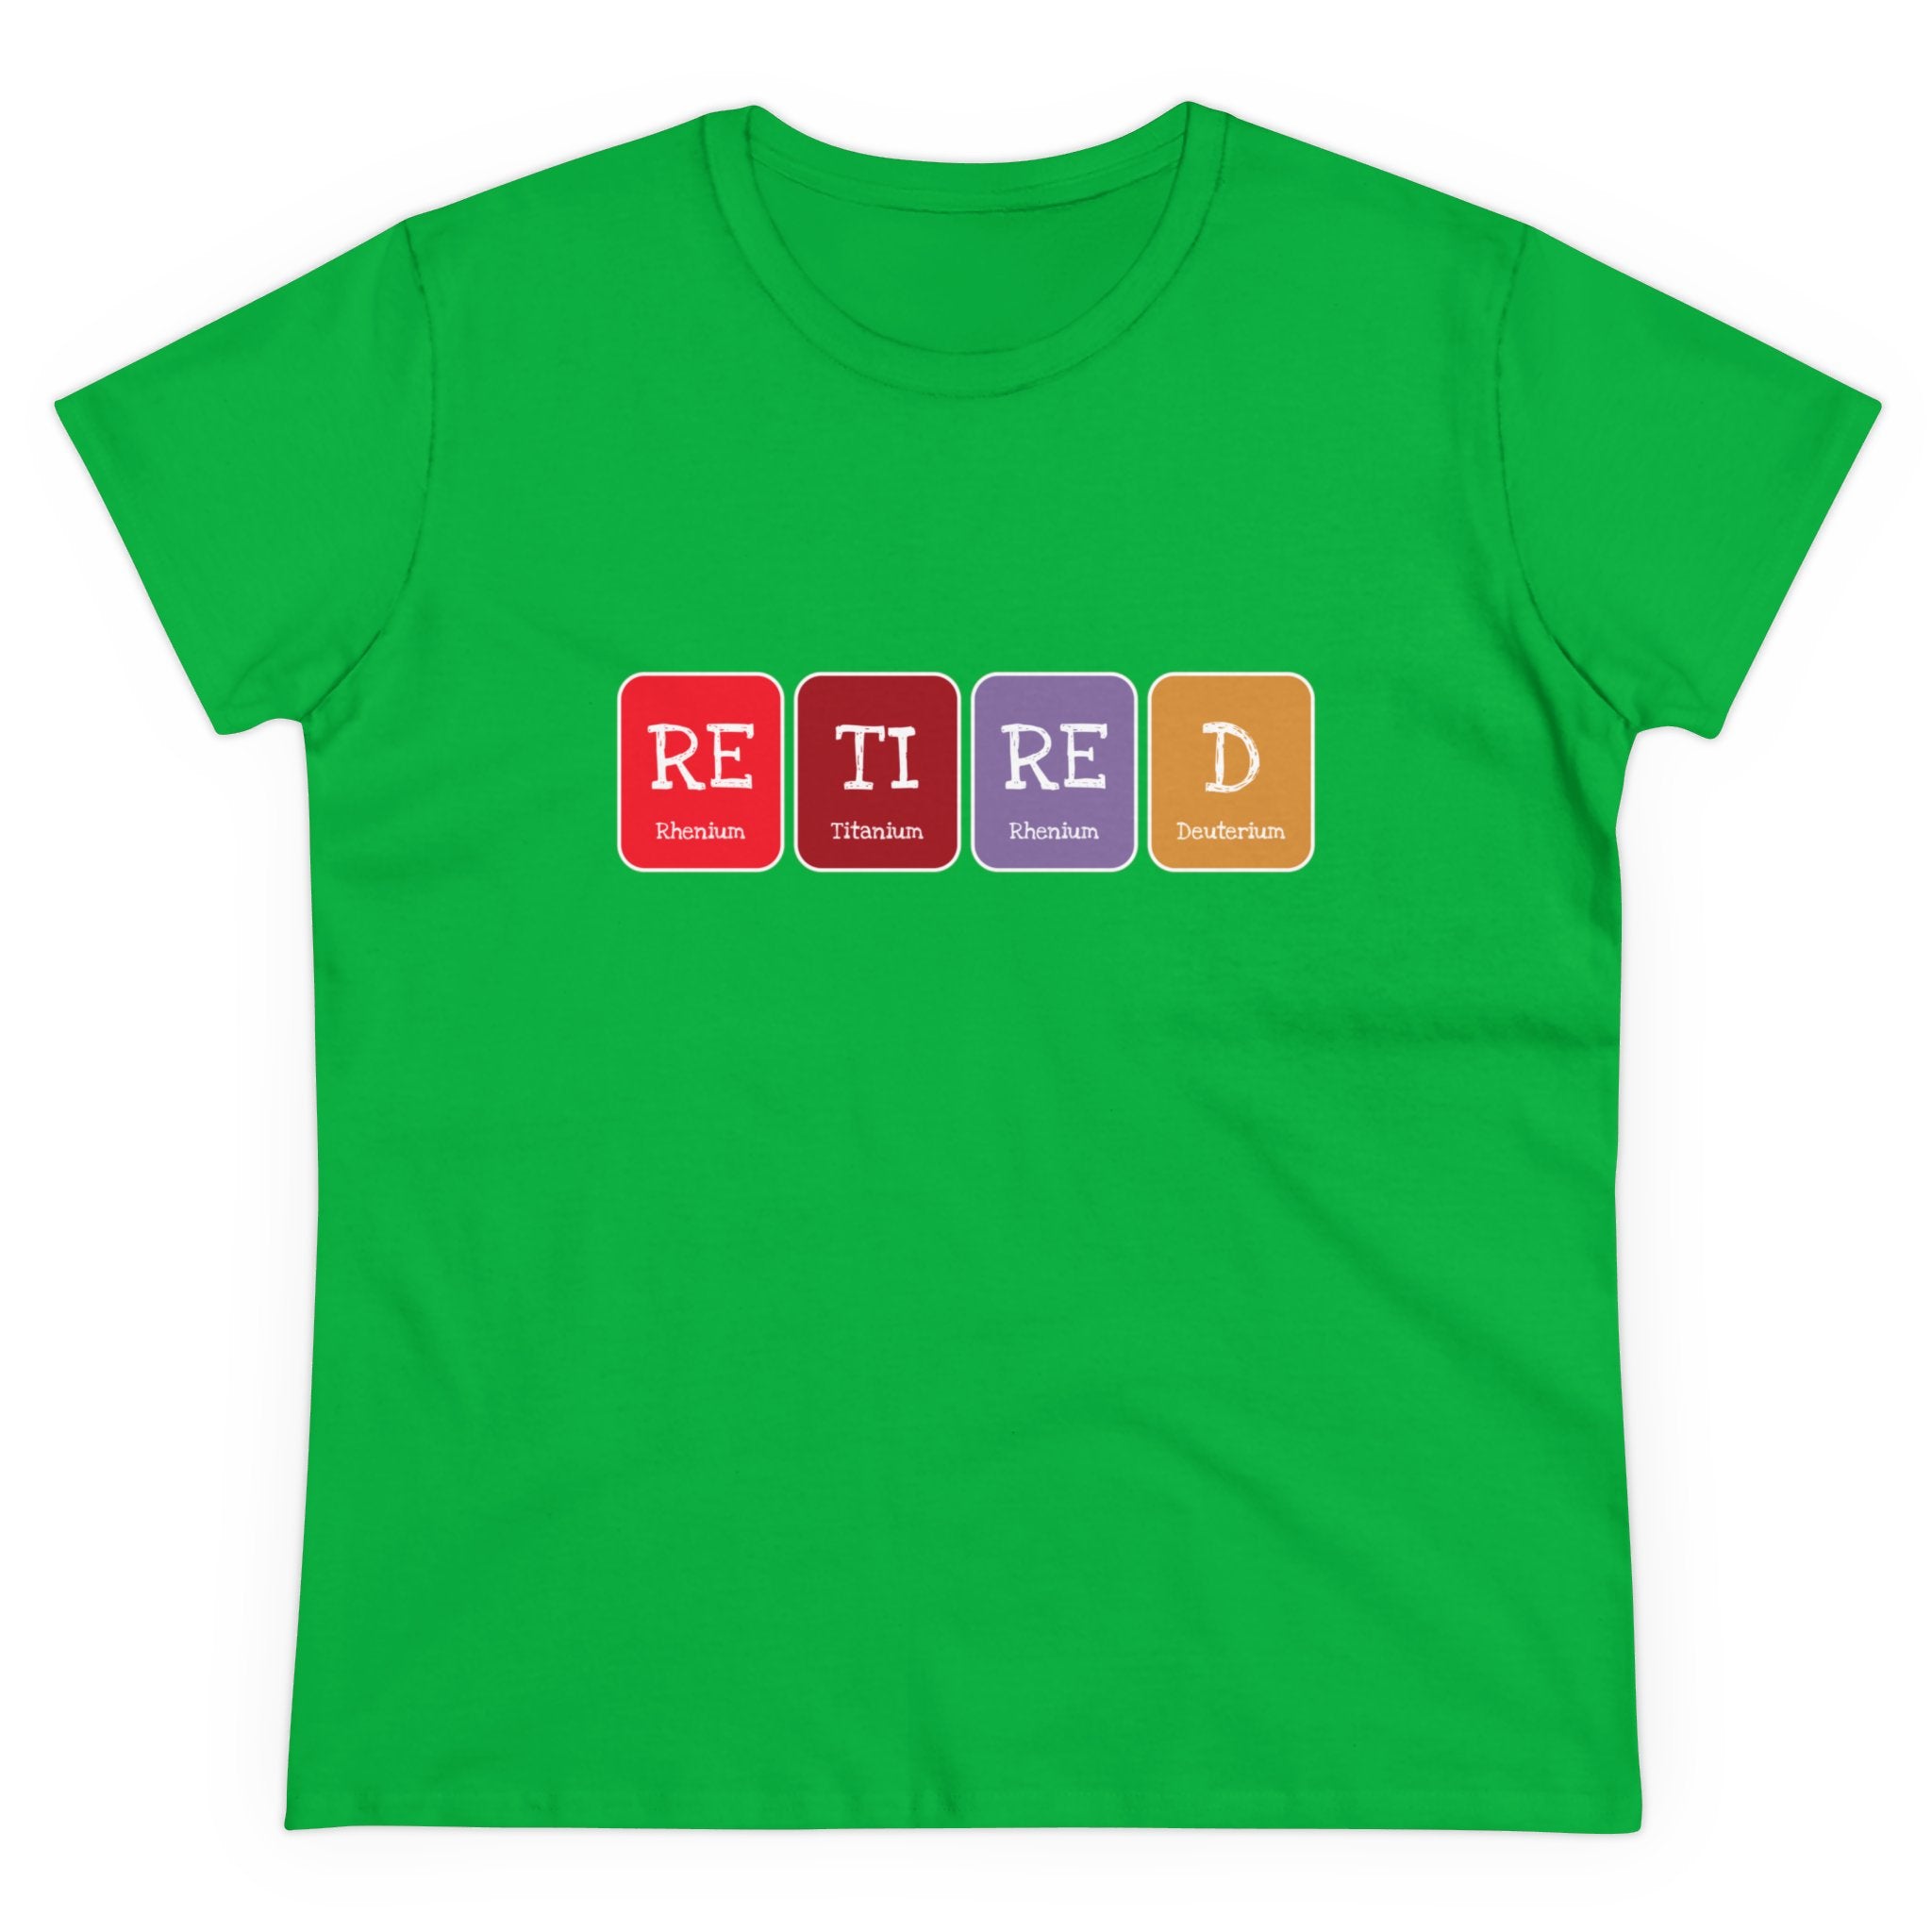 Retired - Women's Tee designed with colorful blocks spelling "Retired," featuring the chemical elements Rhenium, Titanium, Rhenium, and Dubnium. Perfect for all weather.